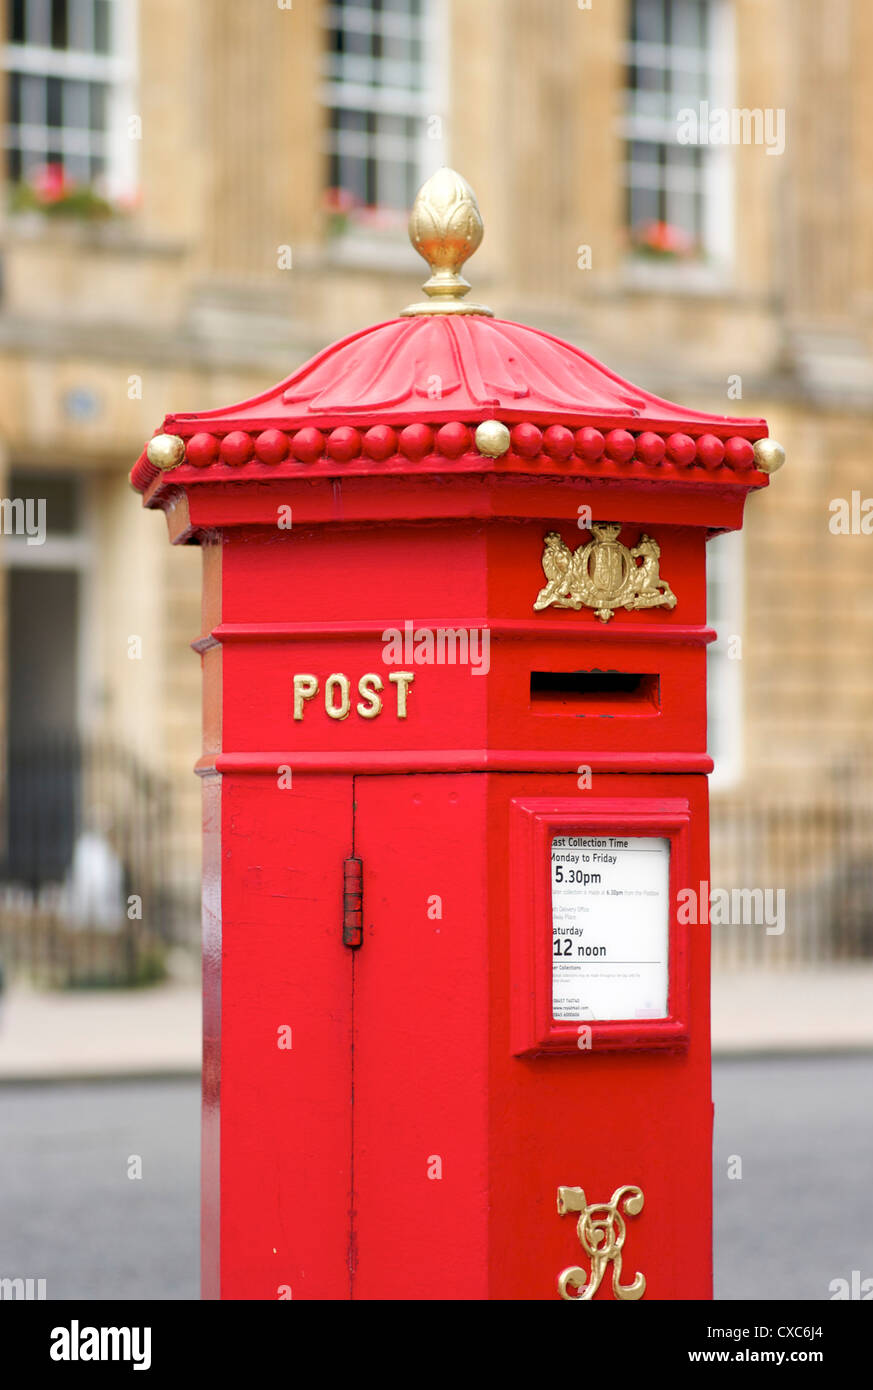 Bath Street High Resolution Stock Photography and Images - Alamy